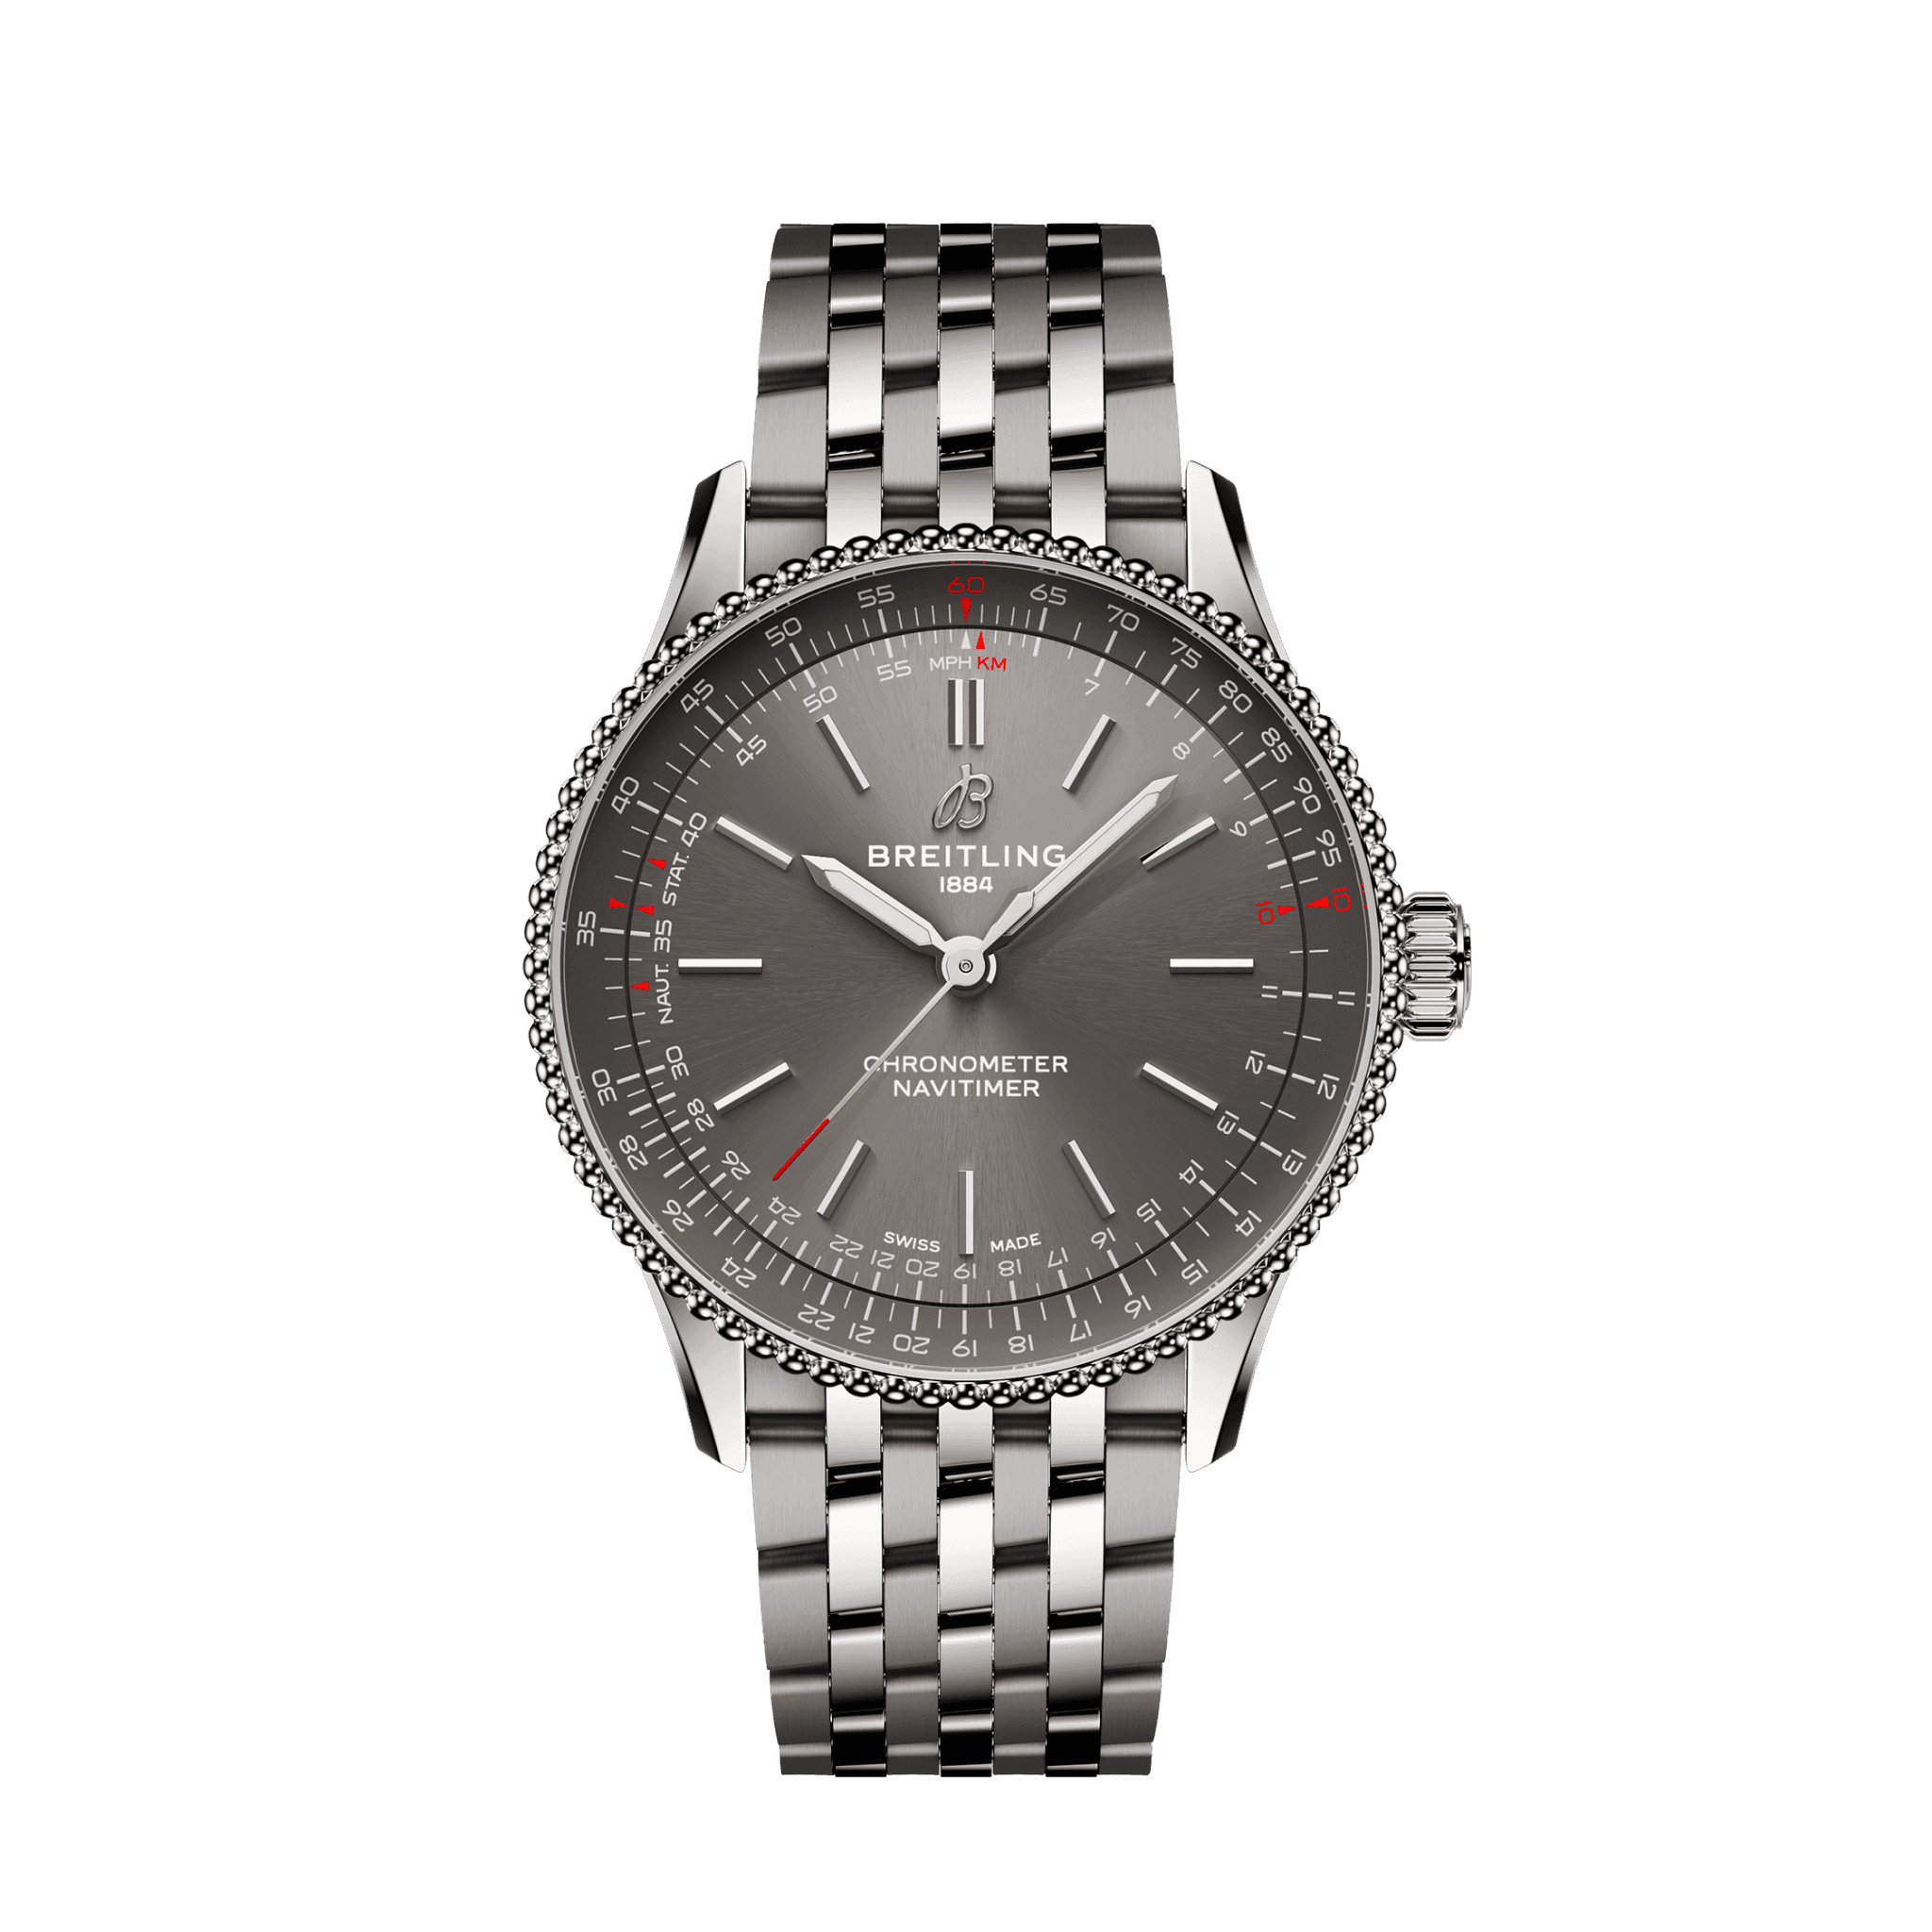 5 Best Omega Watches Under $5000 | The Watch Club by SwissWatchExpo